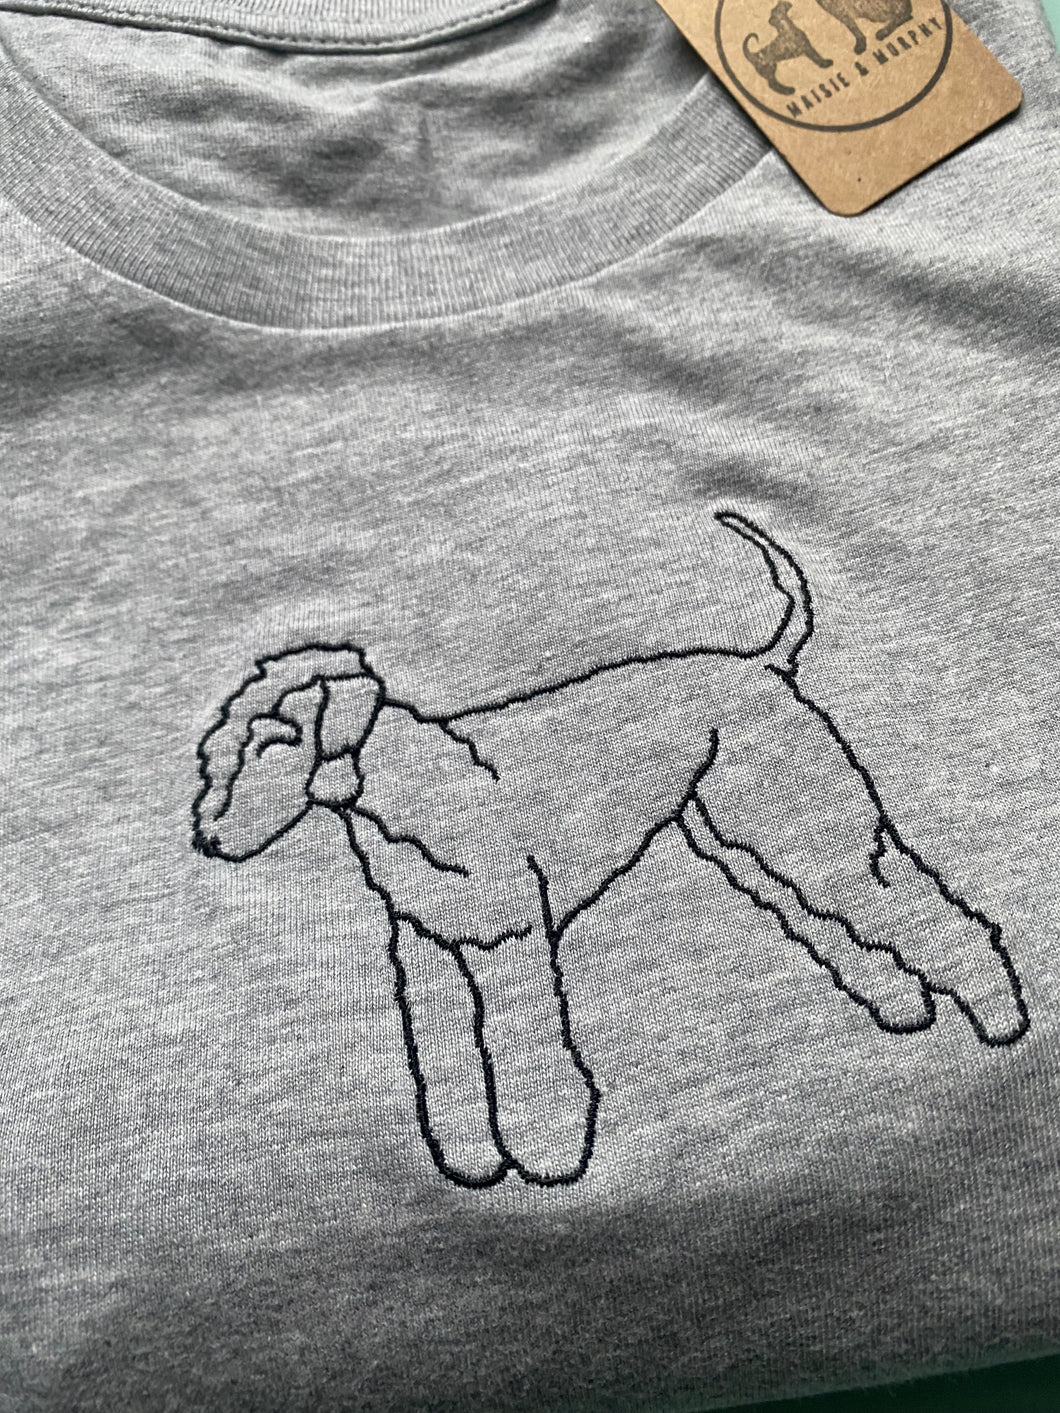 Bedlington Terrier Silhouette Sweatshirt- Gifts for Terrier lovers and owners